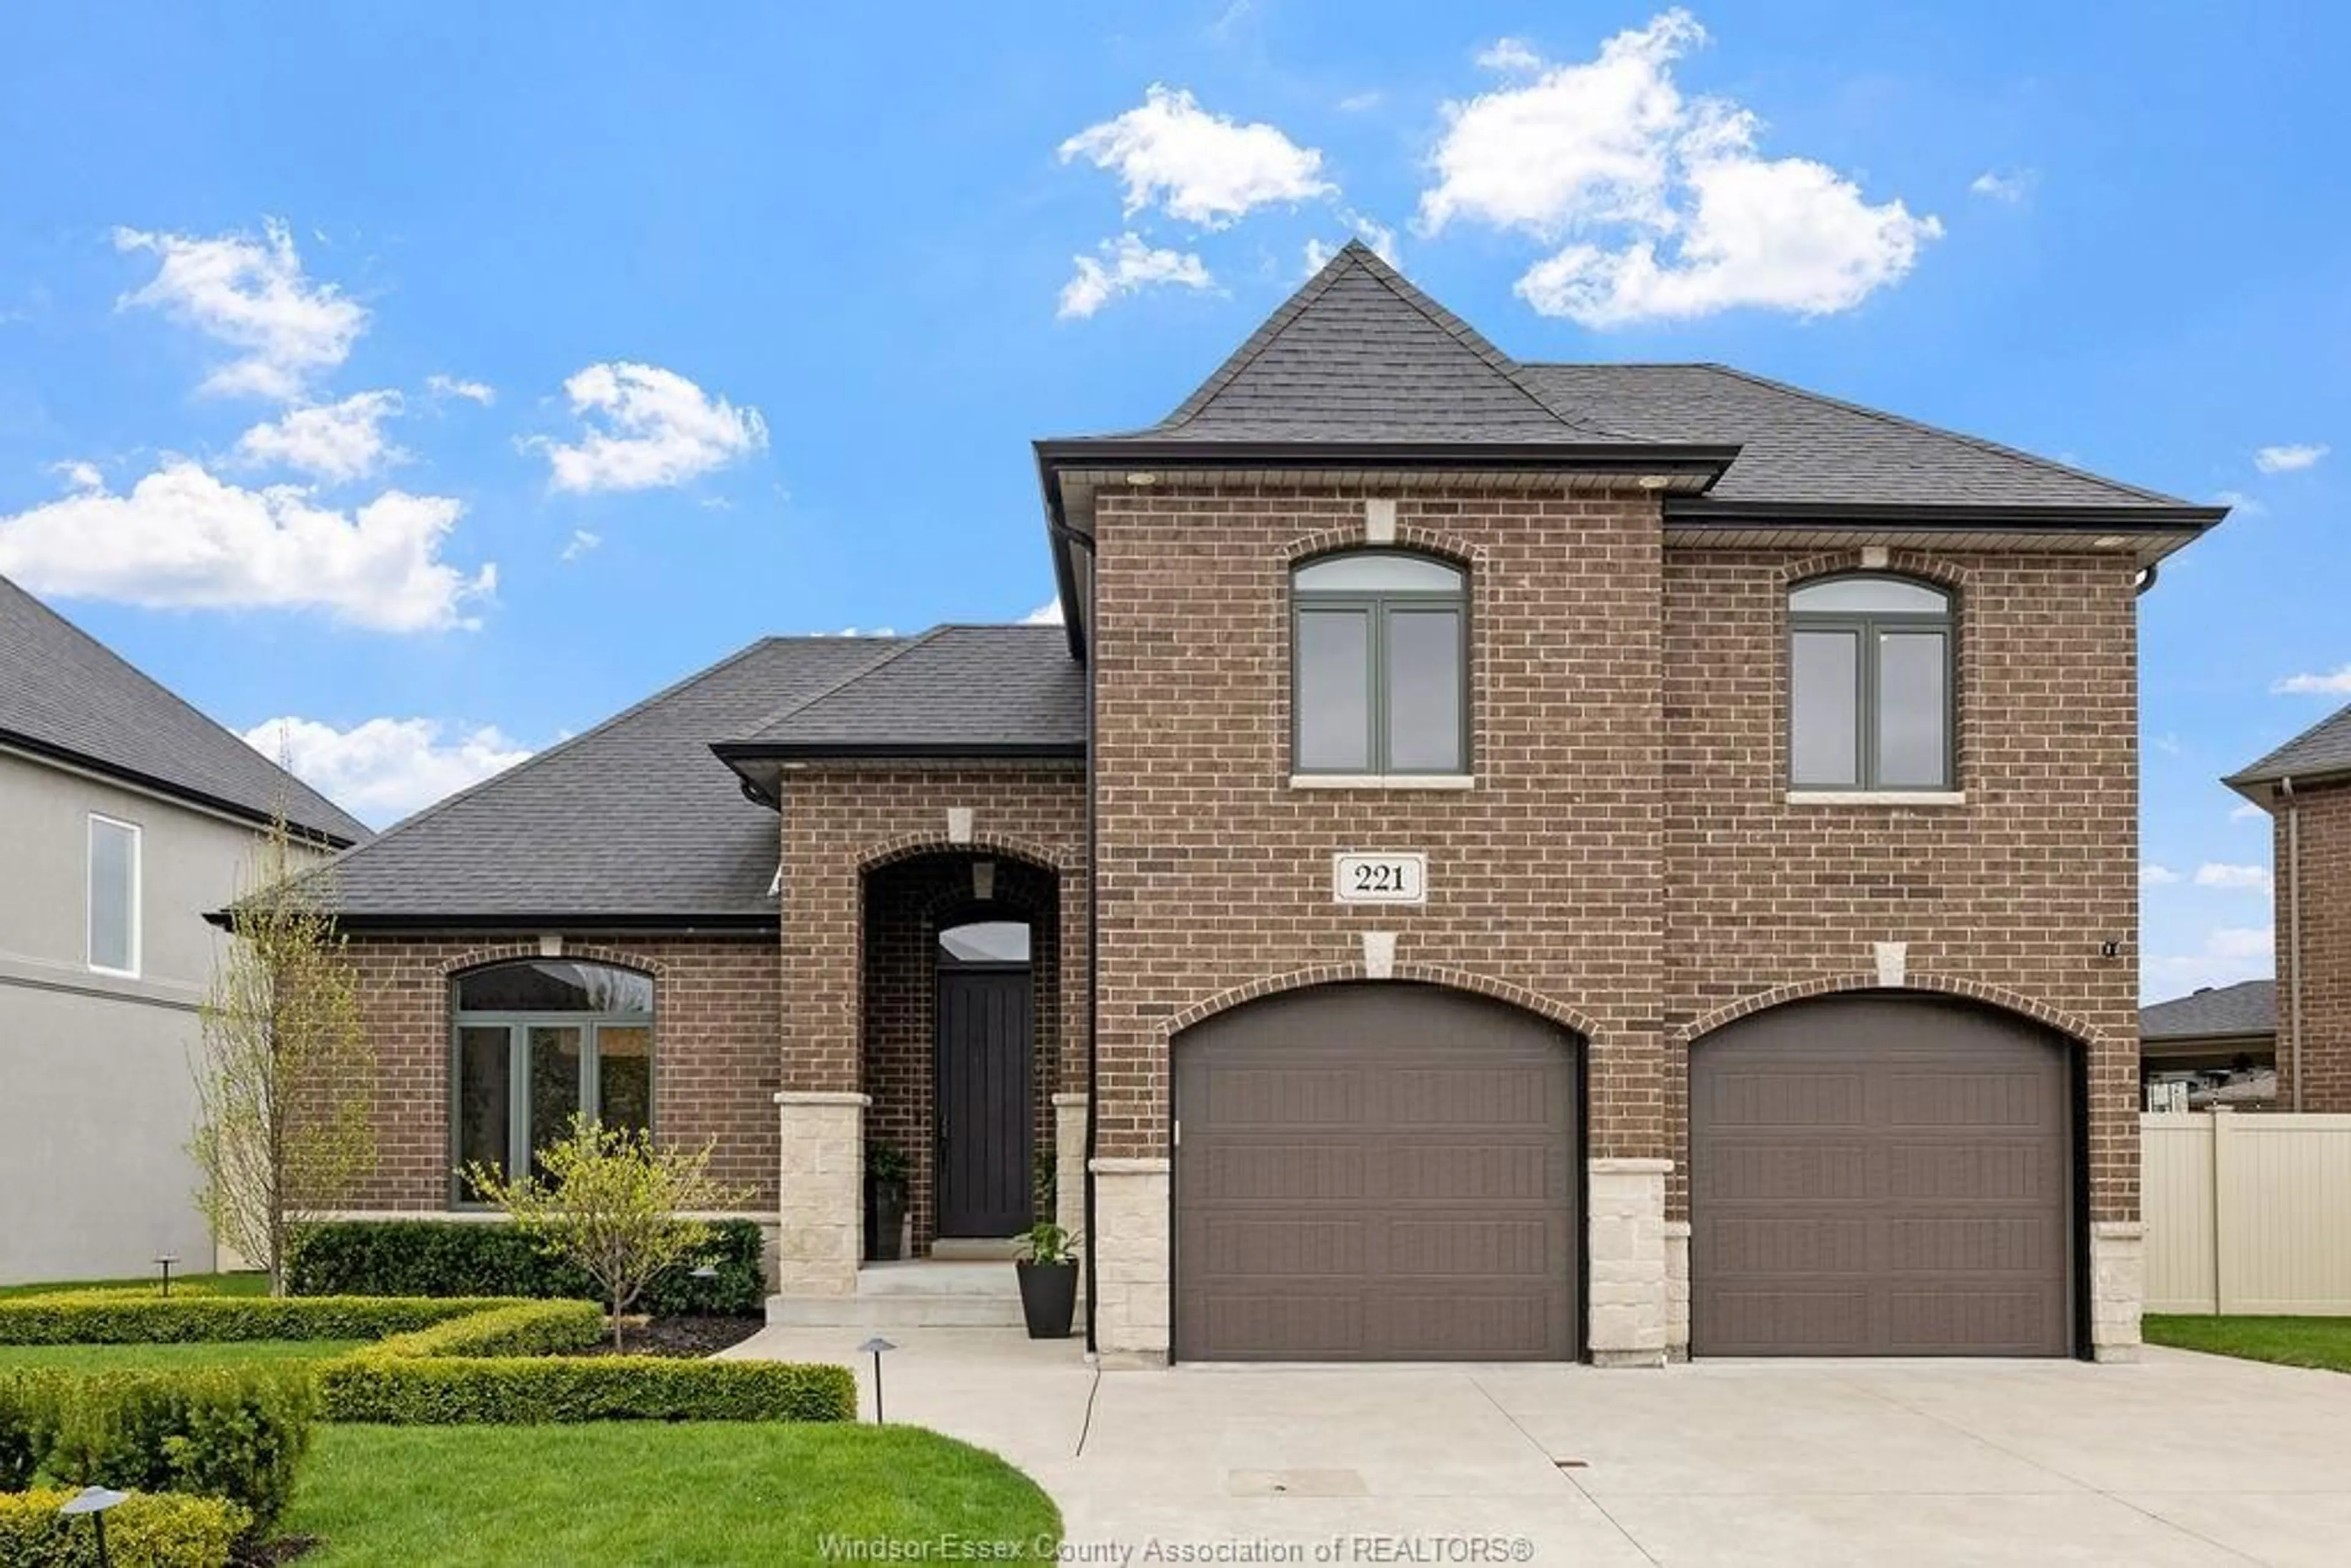 Home with brick exterior material for 221 SELINA, Lakeshore Ontario N9K 0A4